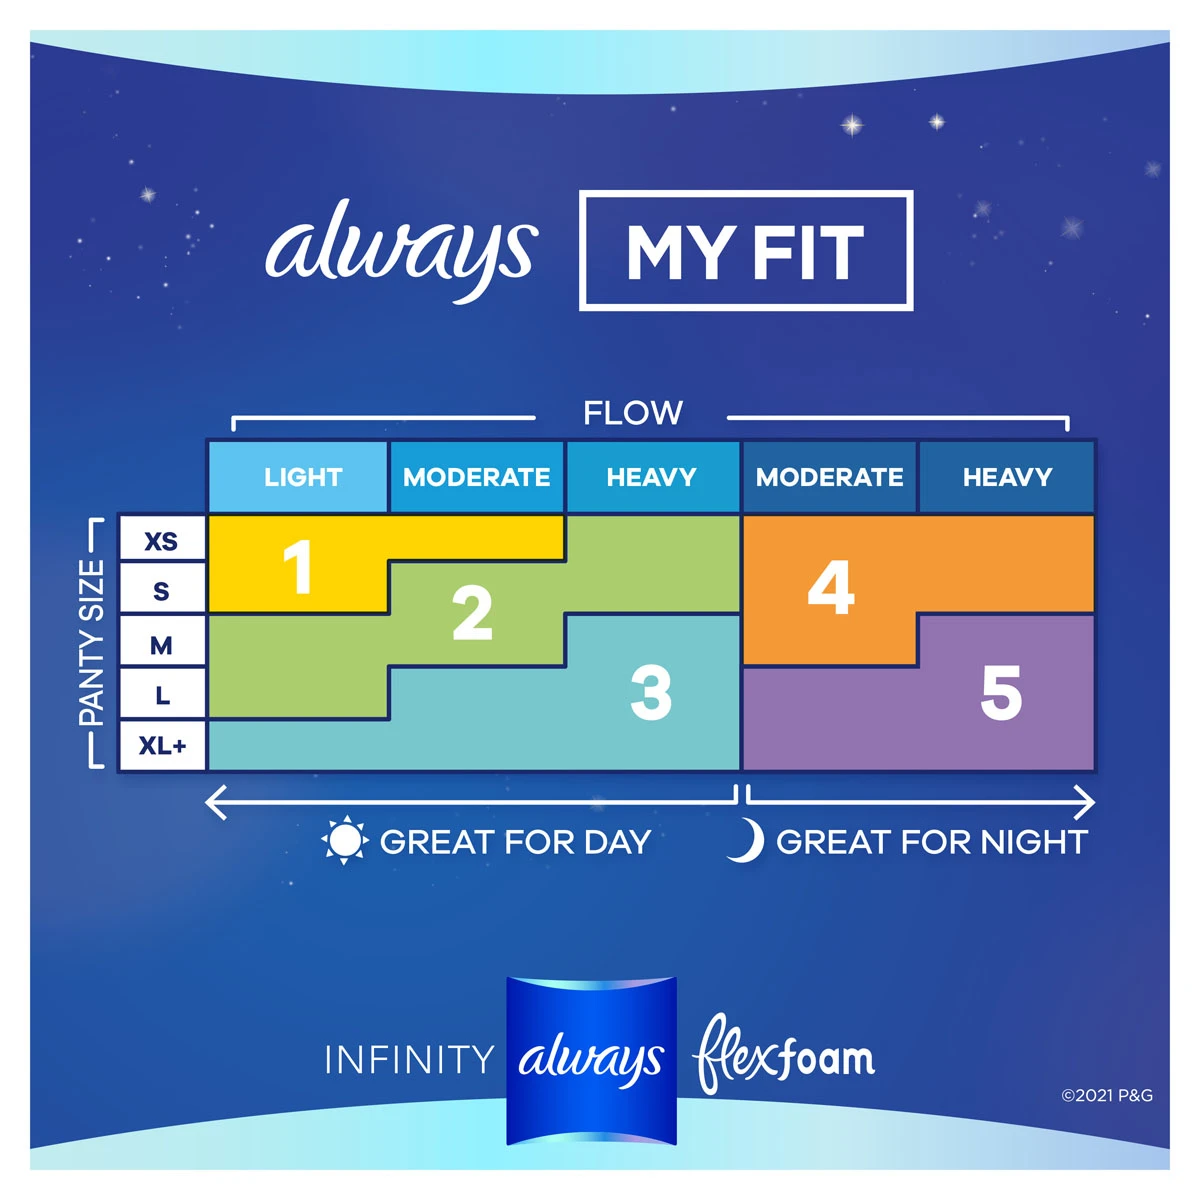 Always FlexFoam Pads for Women, Extra Heavy Overnight, with Wings, Scente -  26 ea